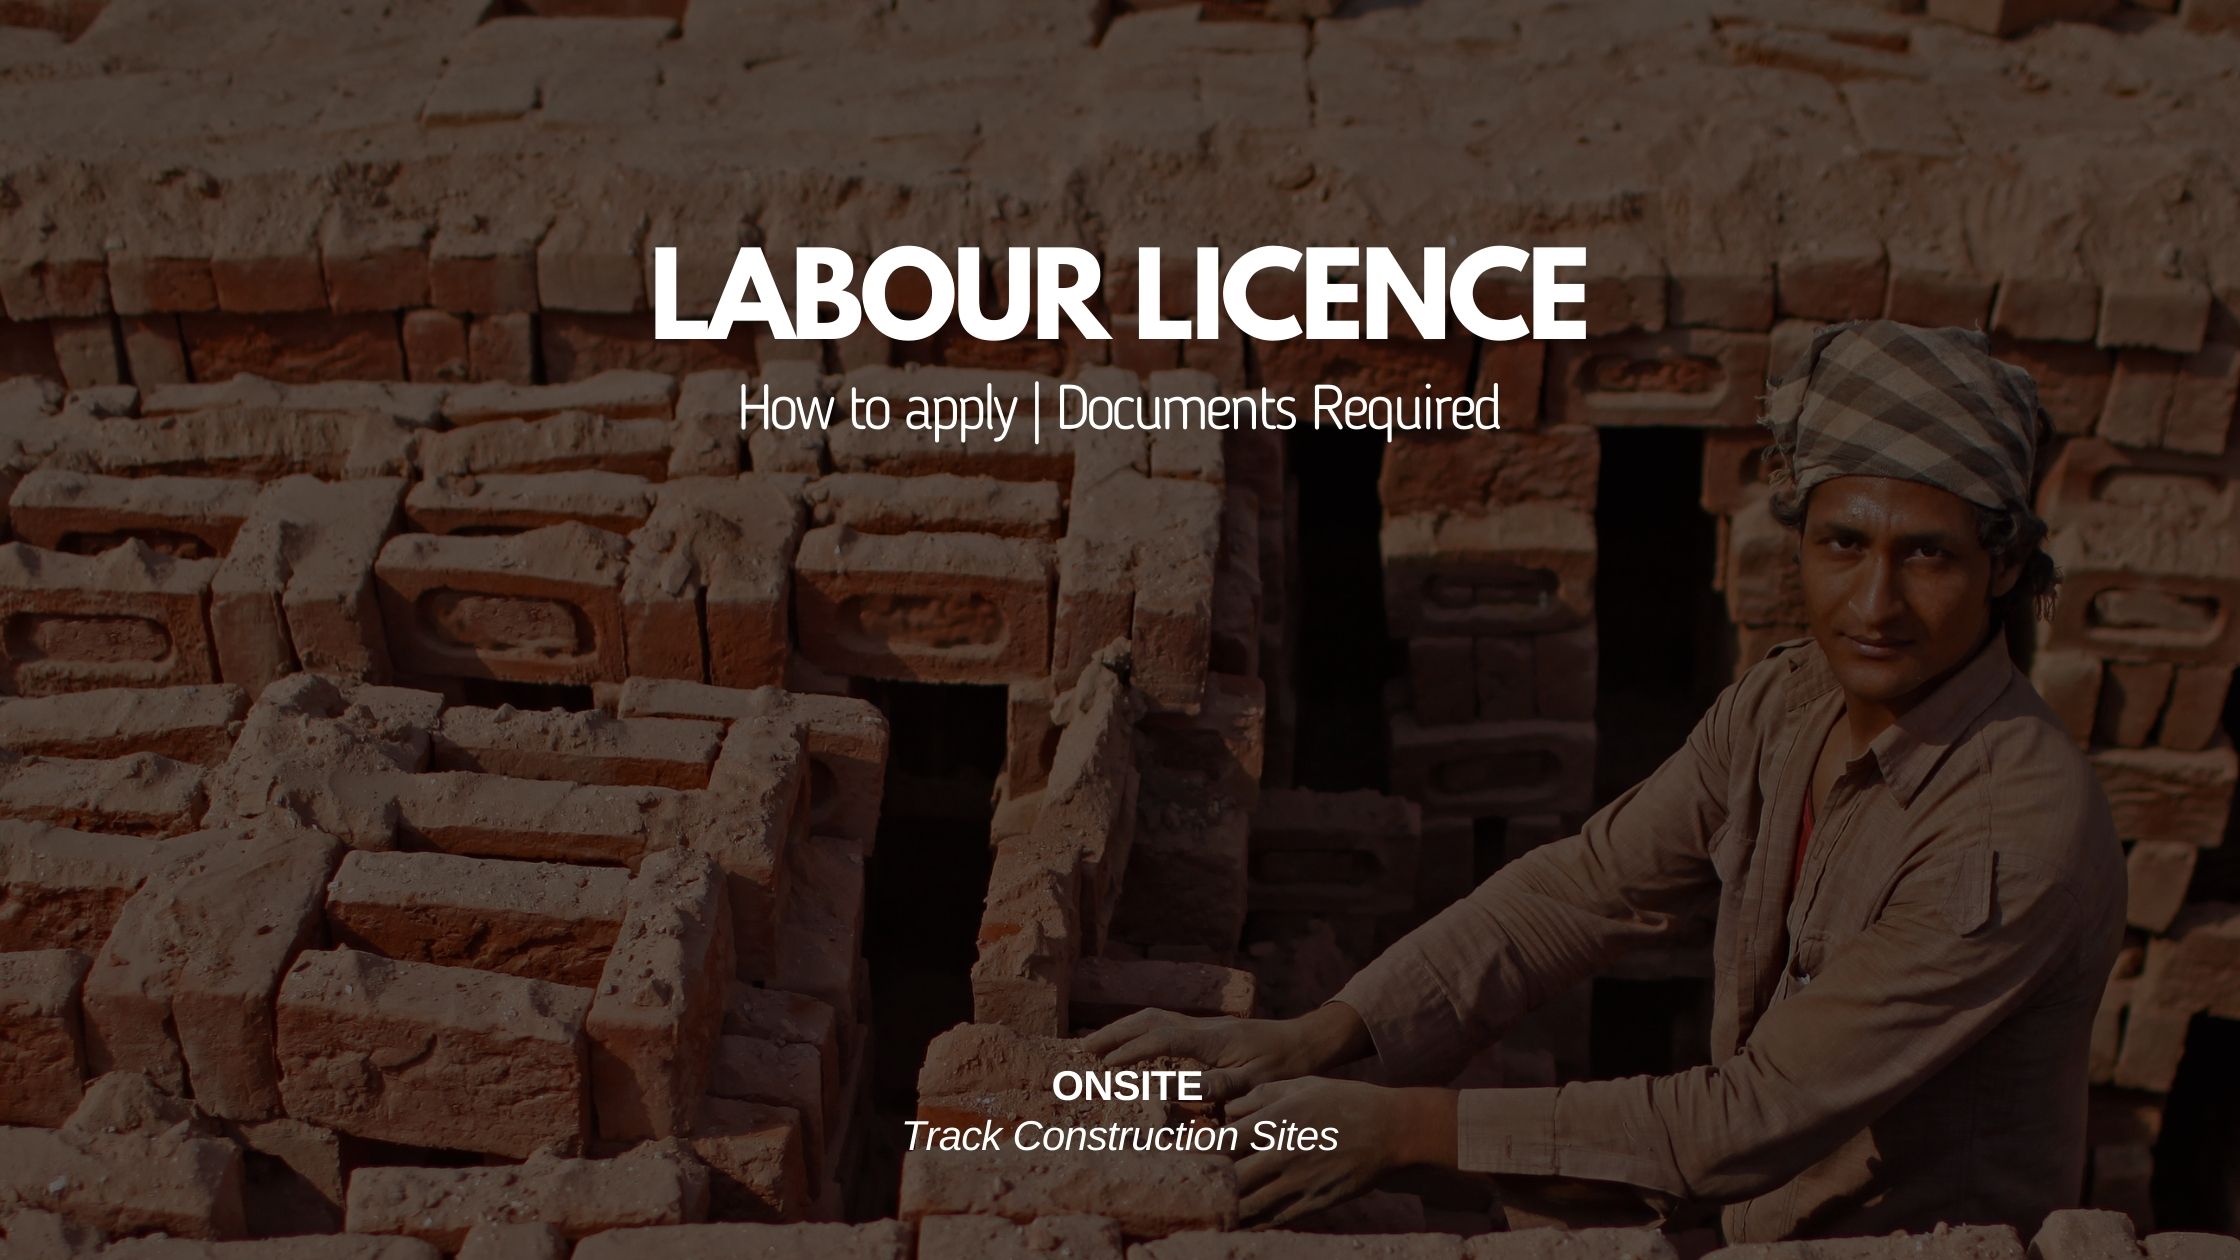 Picture of a brick labour working with heading labour licence